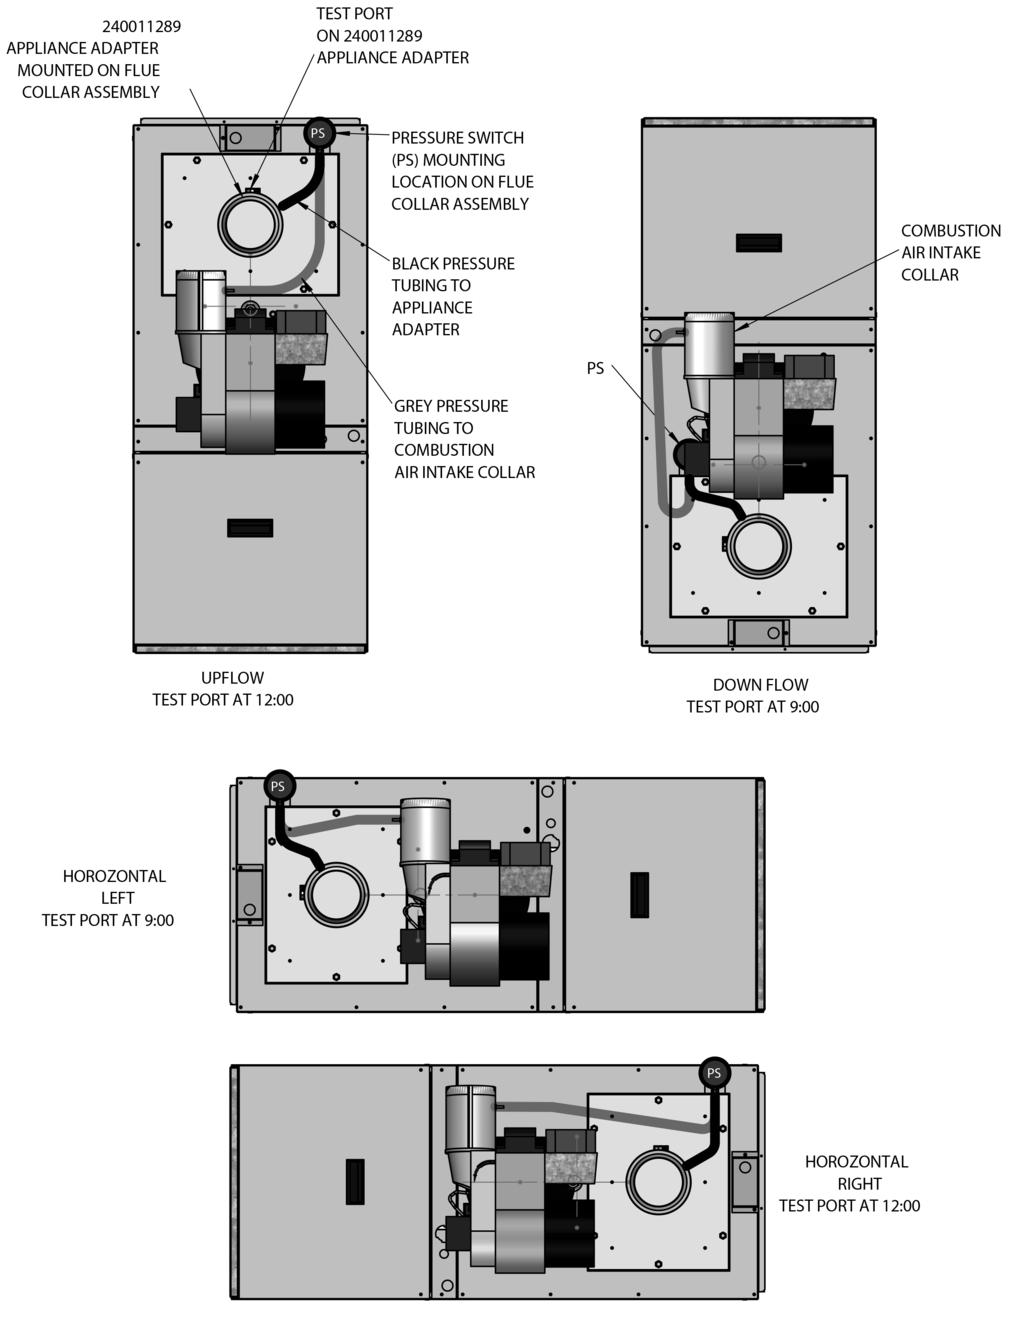 DIRECT VENTING OF OLSEN OIL FIRED FURNACES Figure 7 - Appliance Adapter Orientation, Pressure Switch Location, and Tubing Connections for Proper Blocked Vent Safety Switch Operation 240011289